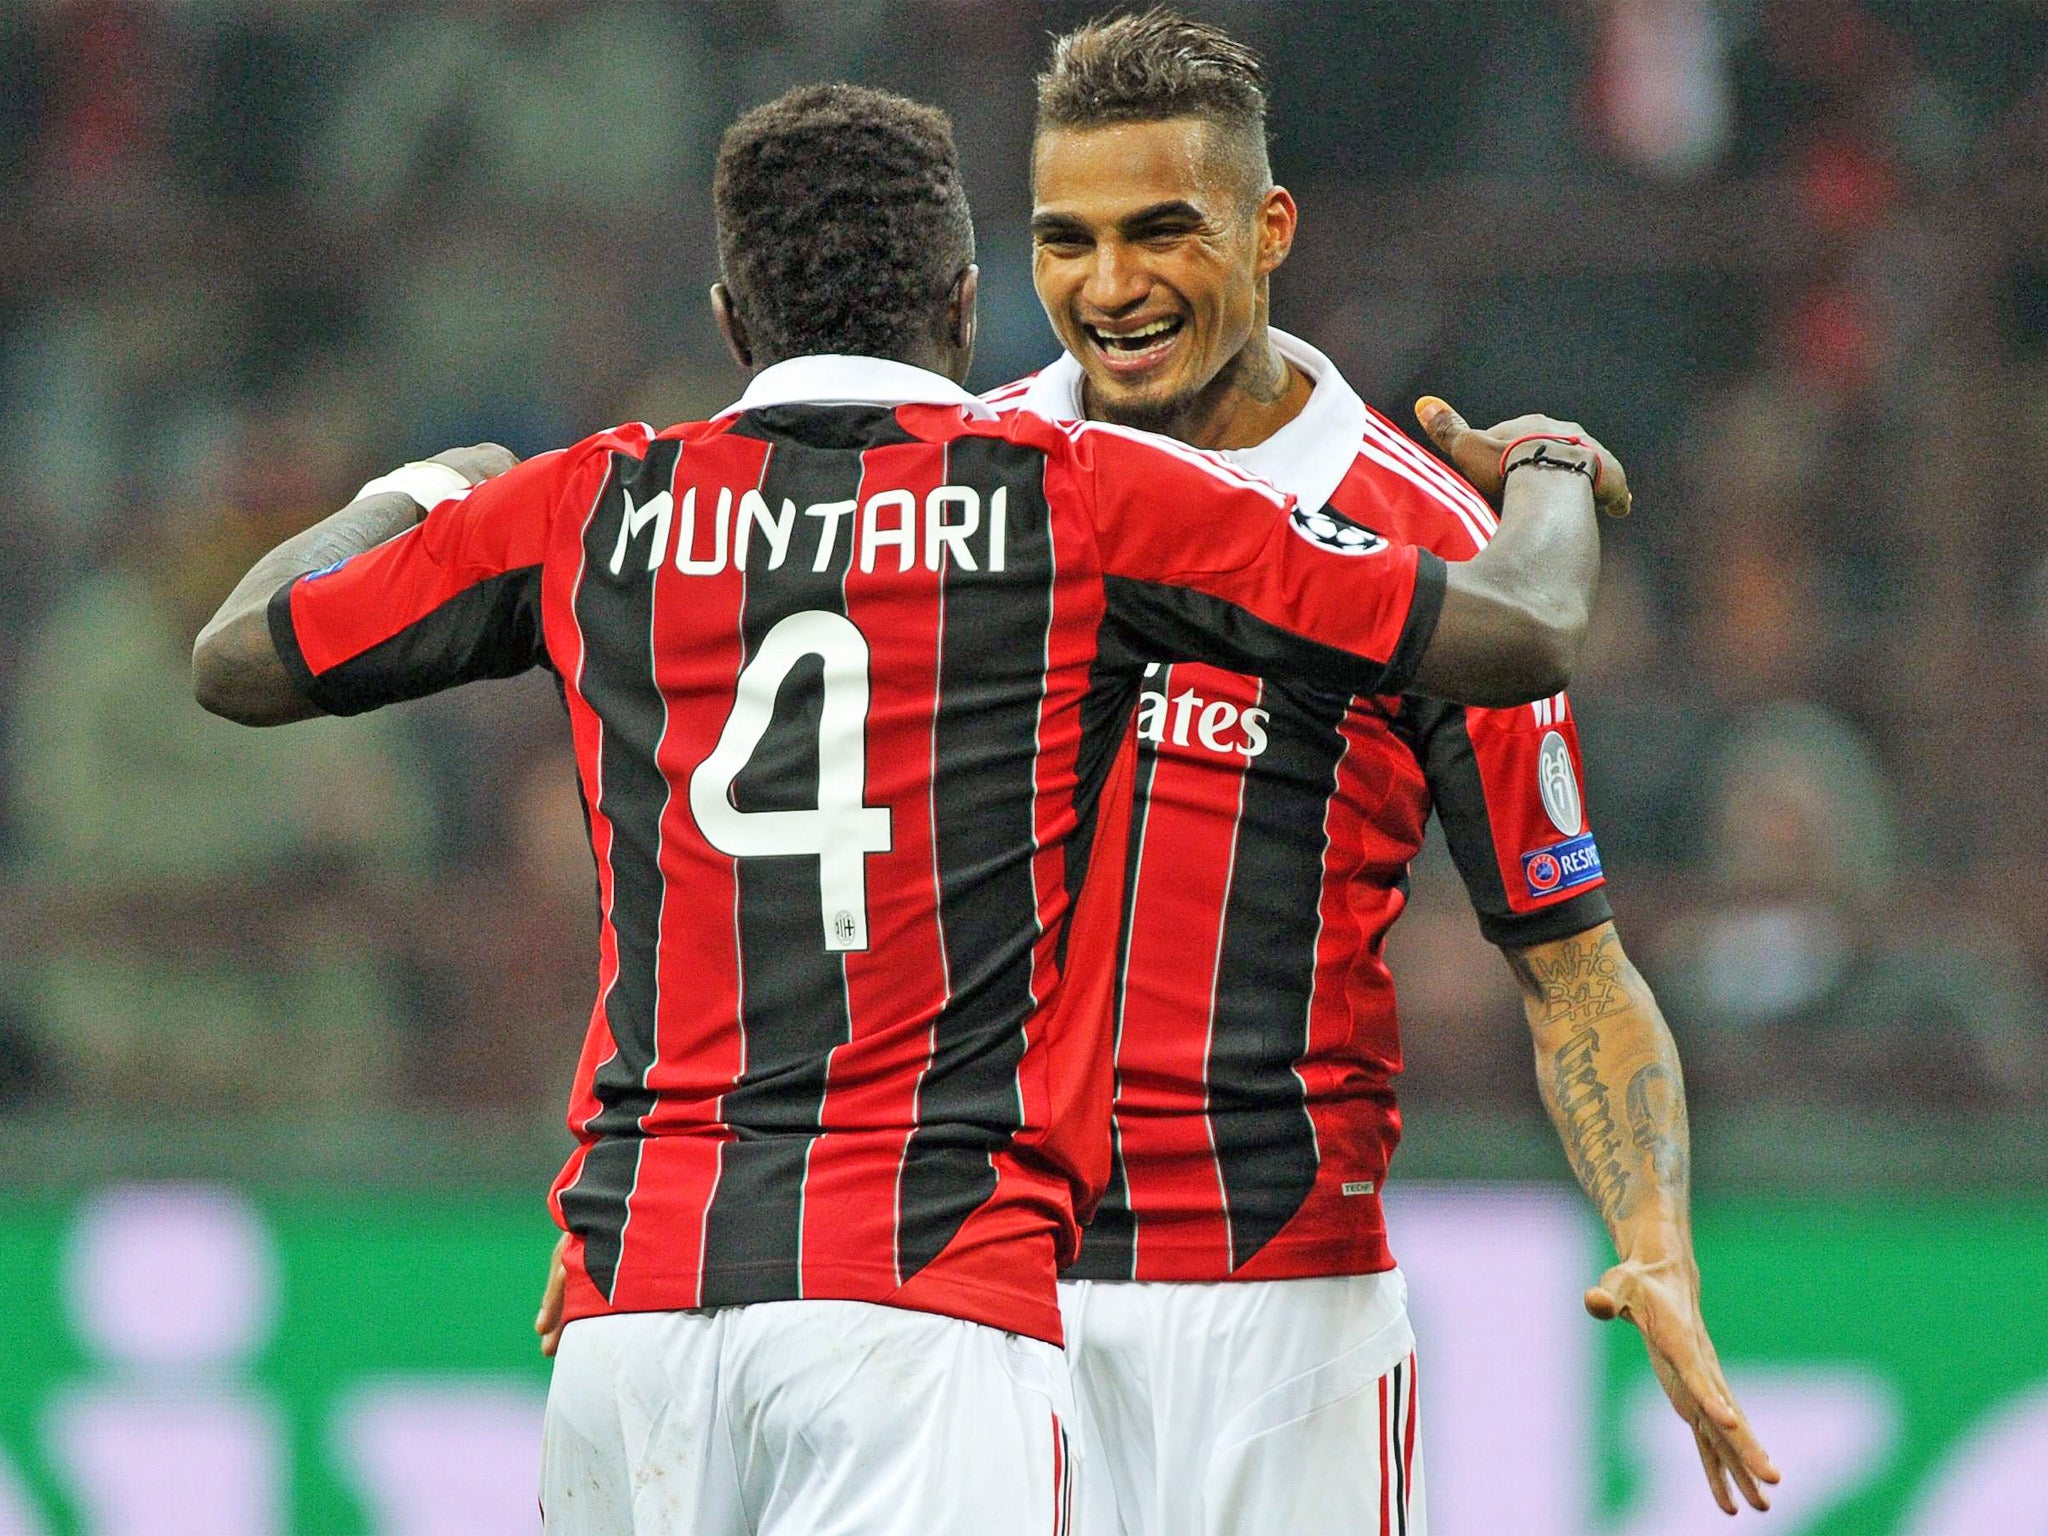 Boateng and Muntari were the heroes for Milan